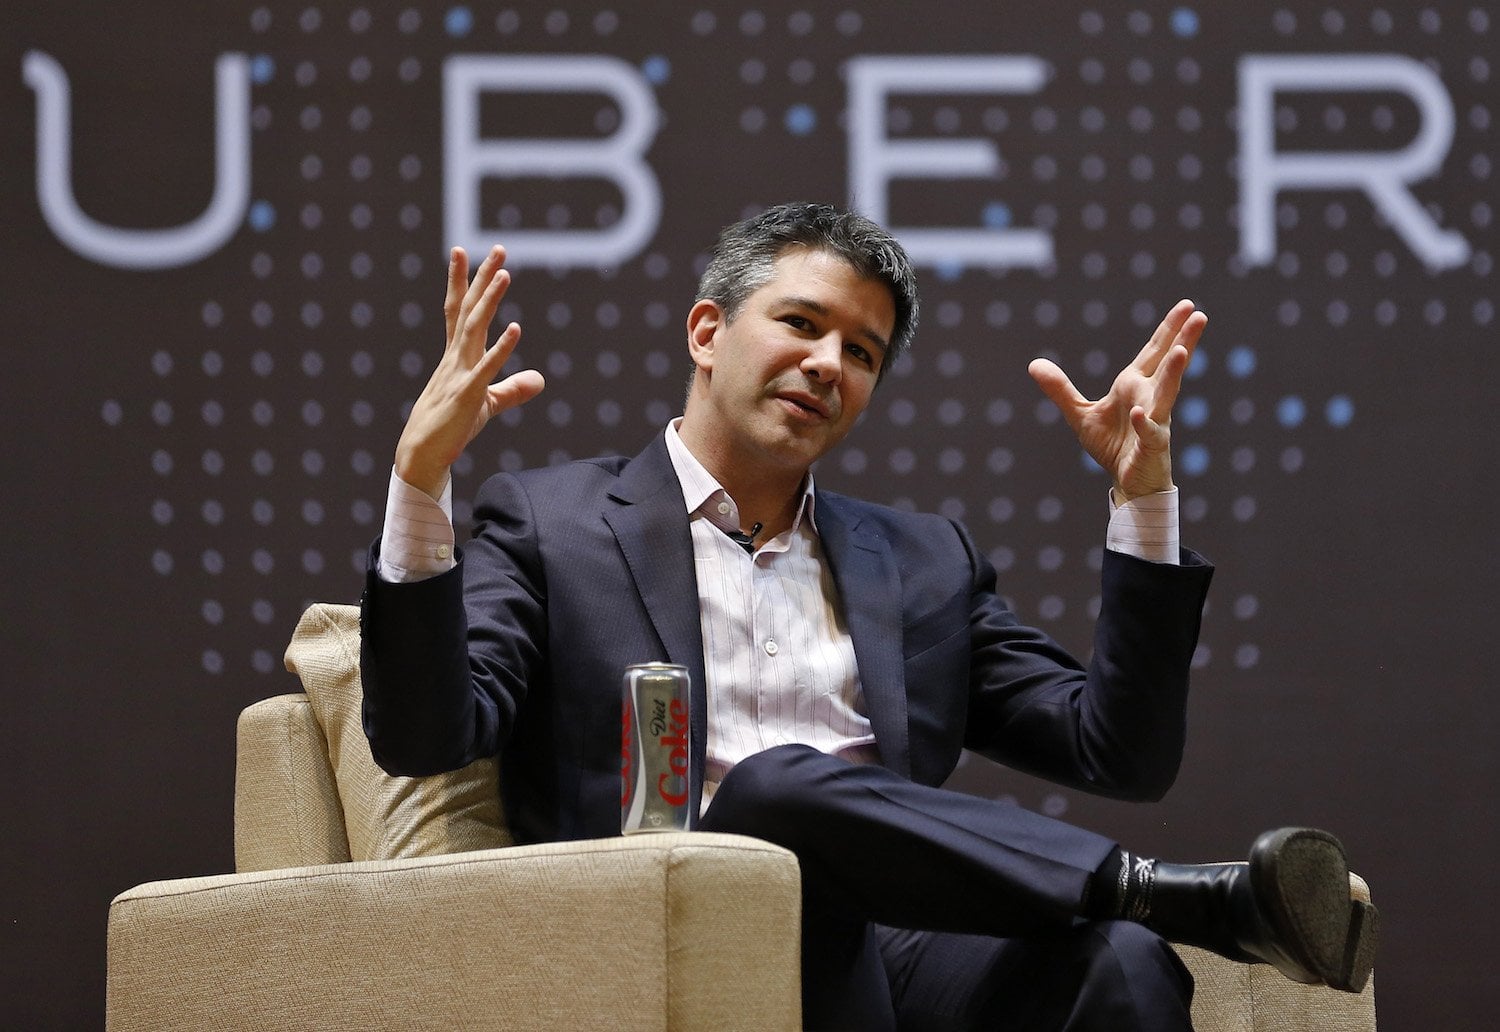 On Tuesday Uber chief executive Travis Kalanick announced an indefinite leave of absence as the embattled ridesharing giant unveiled for the reformation